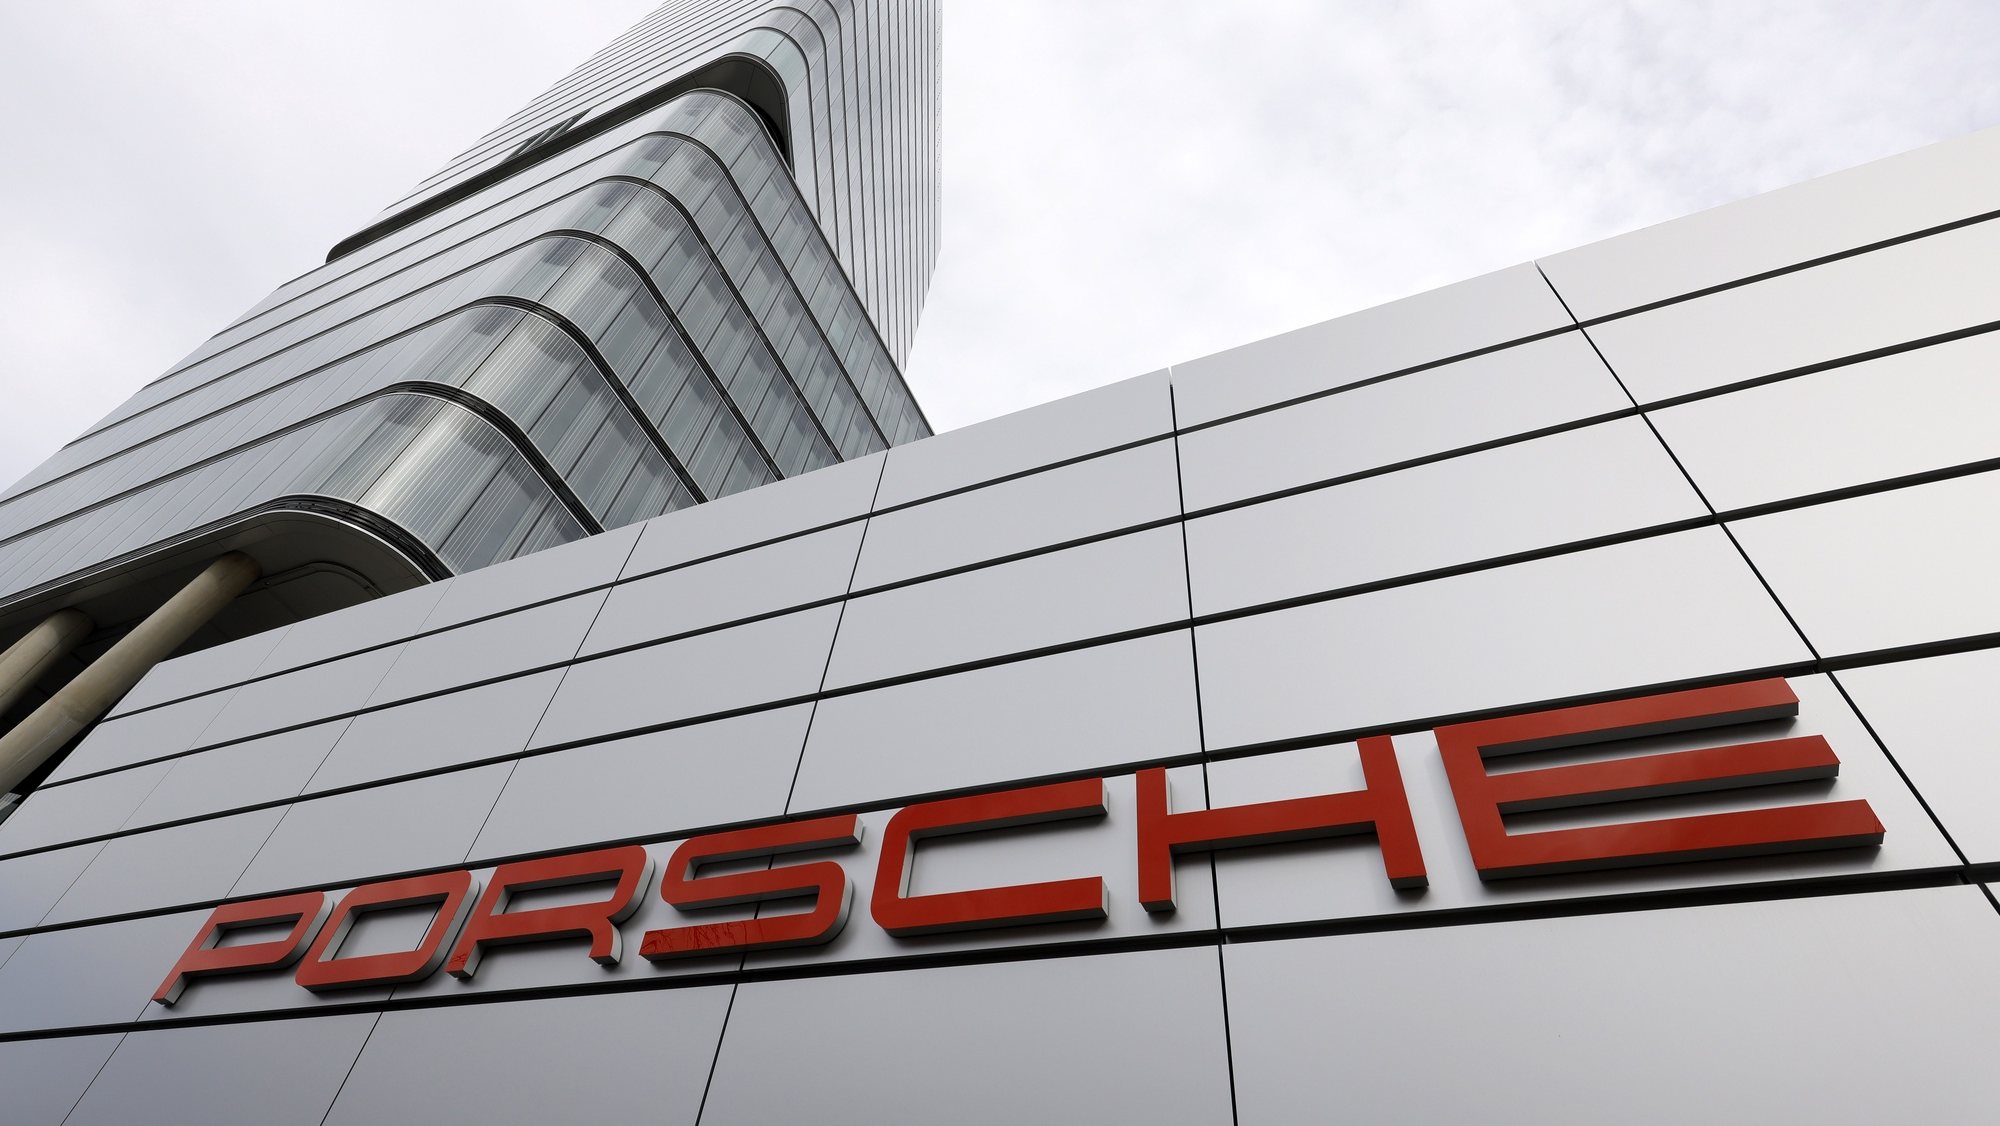 epa10519869 A logo of German car manufacturer Porsche at a Porsche car dealer in Stuttgart, Germany, 13 March 2023. Porsche reported a growth of 13.6 percent in group sales revenue to 37.6 billion euros in 2022, as well as an increase of 27.4 percent in operating profit to 6.8 billion euros. Porsche AG is a listed German manufacturer of luxury sports cars, SUVs and sedans based in Stuttgart. Porsche AG will present the results of the 2022 financial year at the annual press conference on 13 March 2023.  EPA/RONALD WITTEK